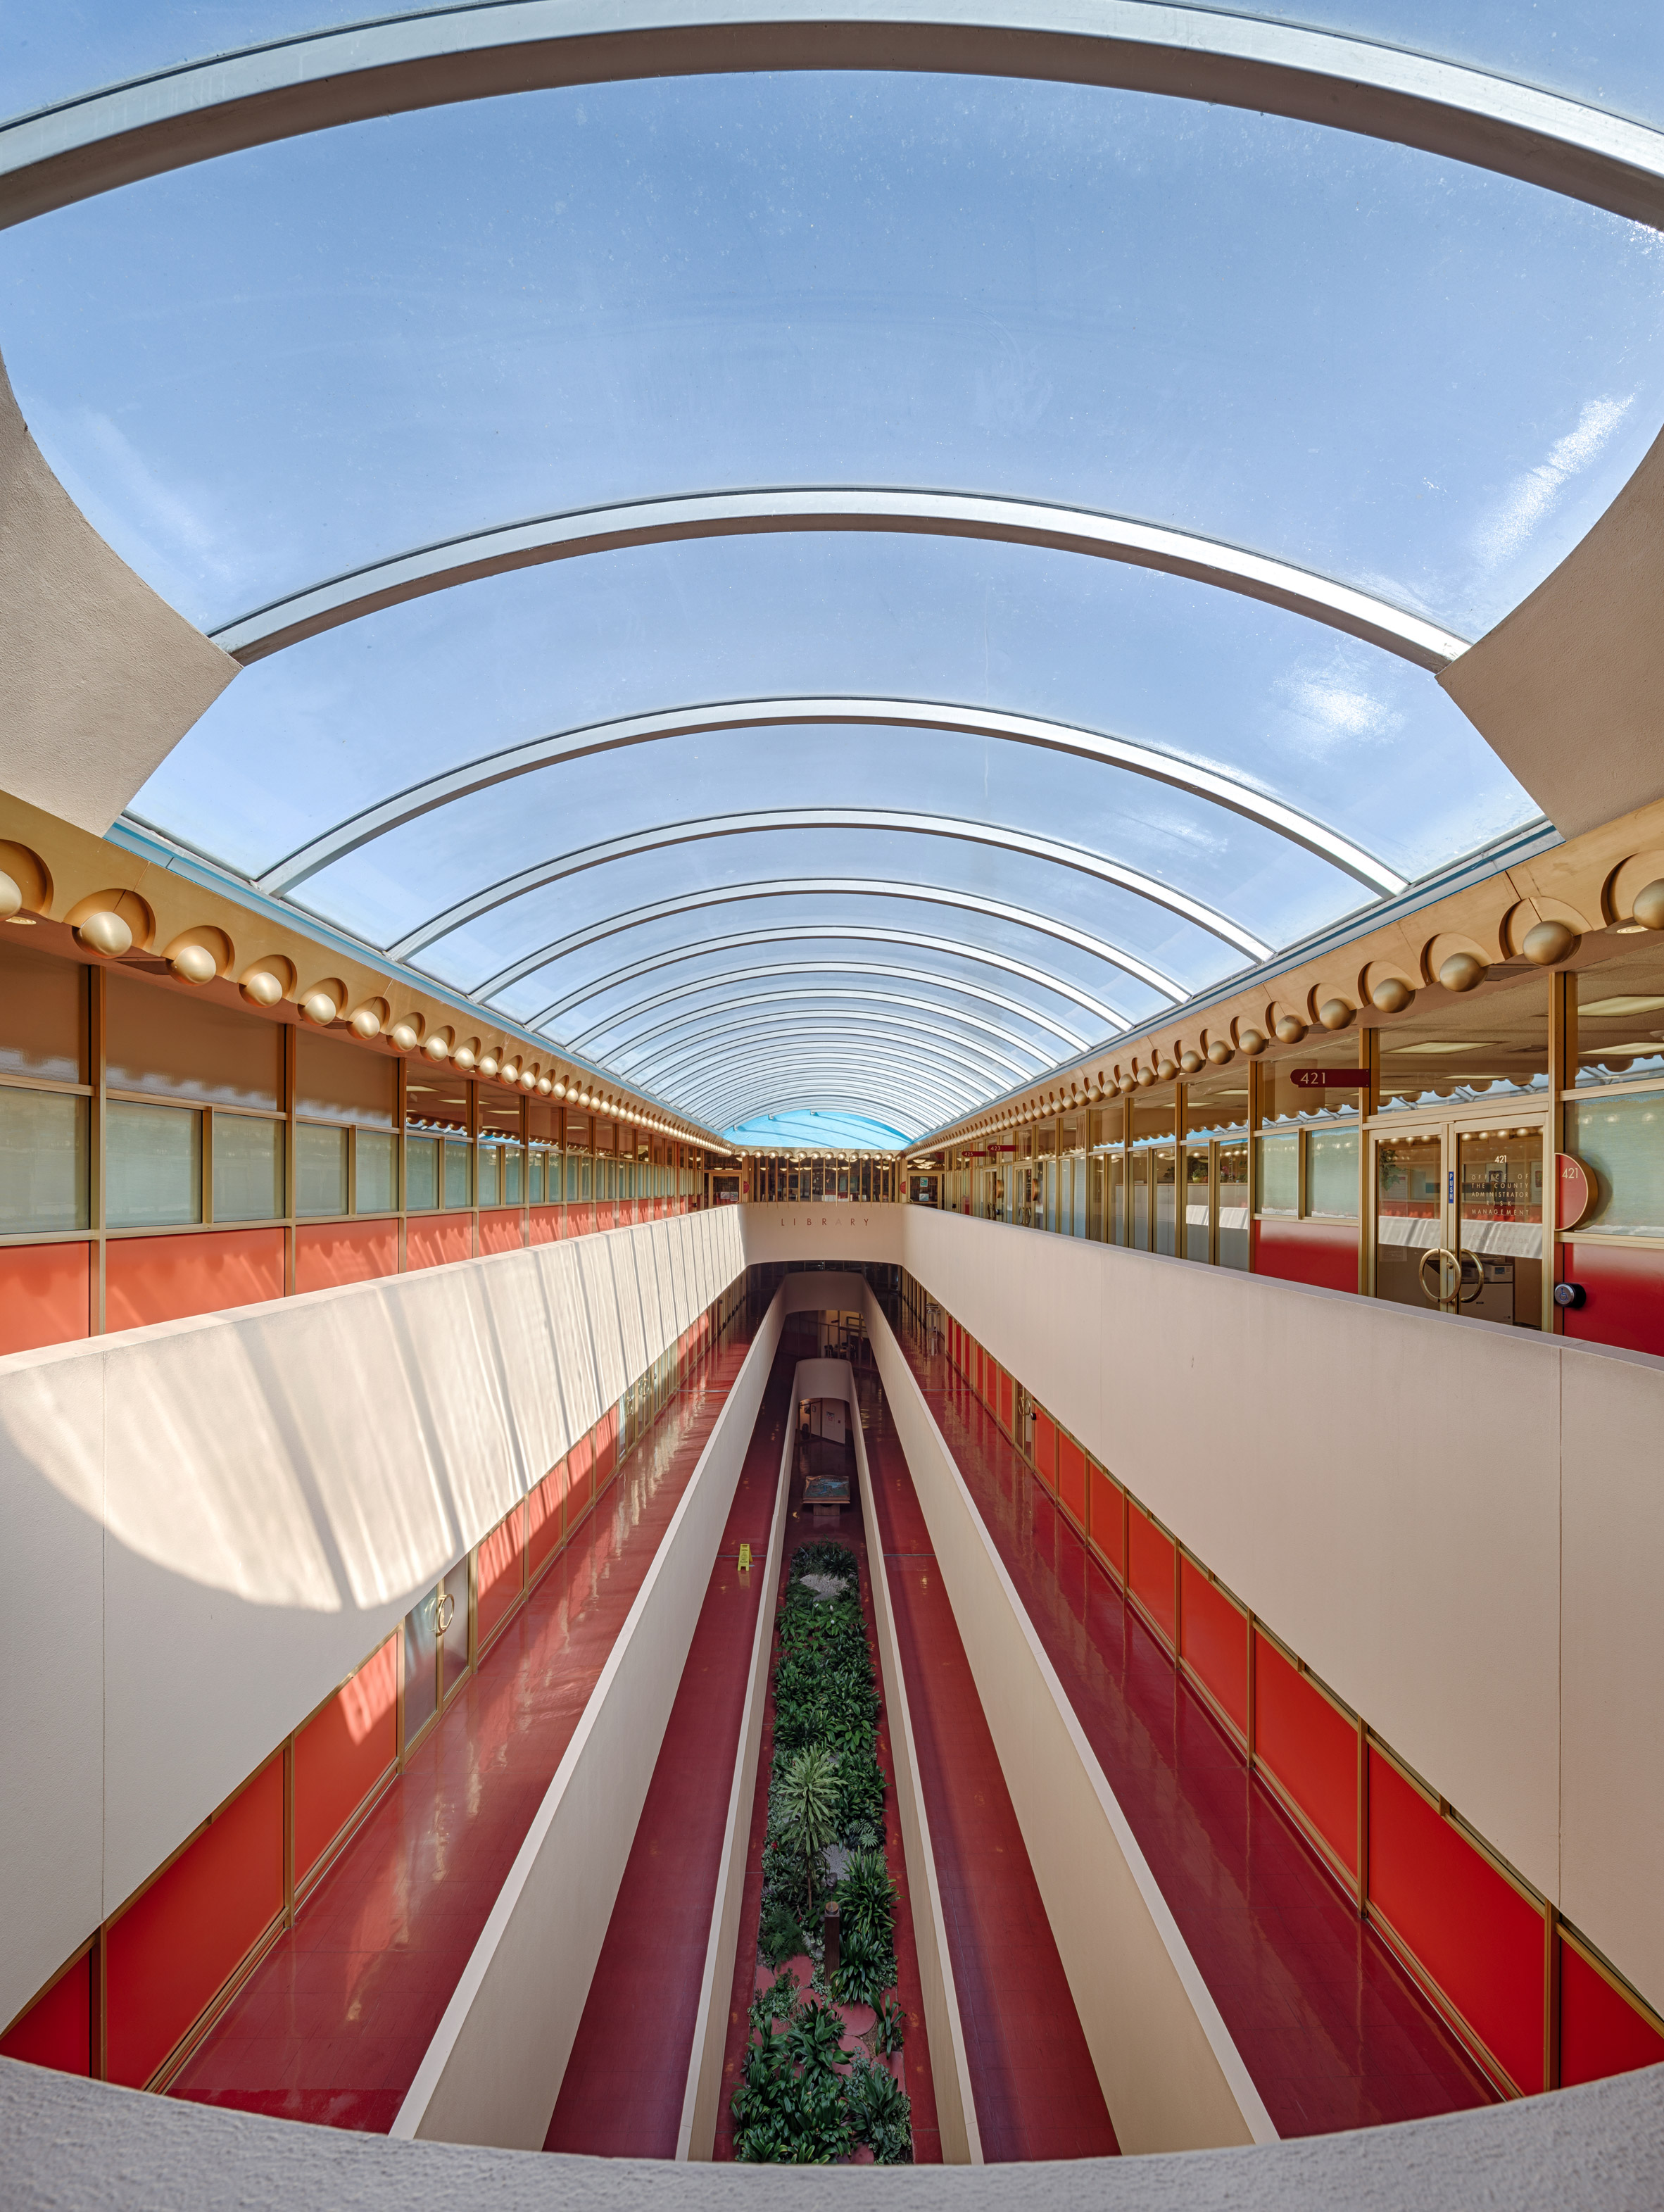 Frank Lloyd Wright's lesser-known designs are captured in new images-34